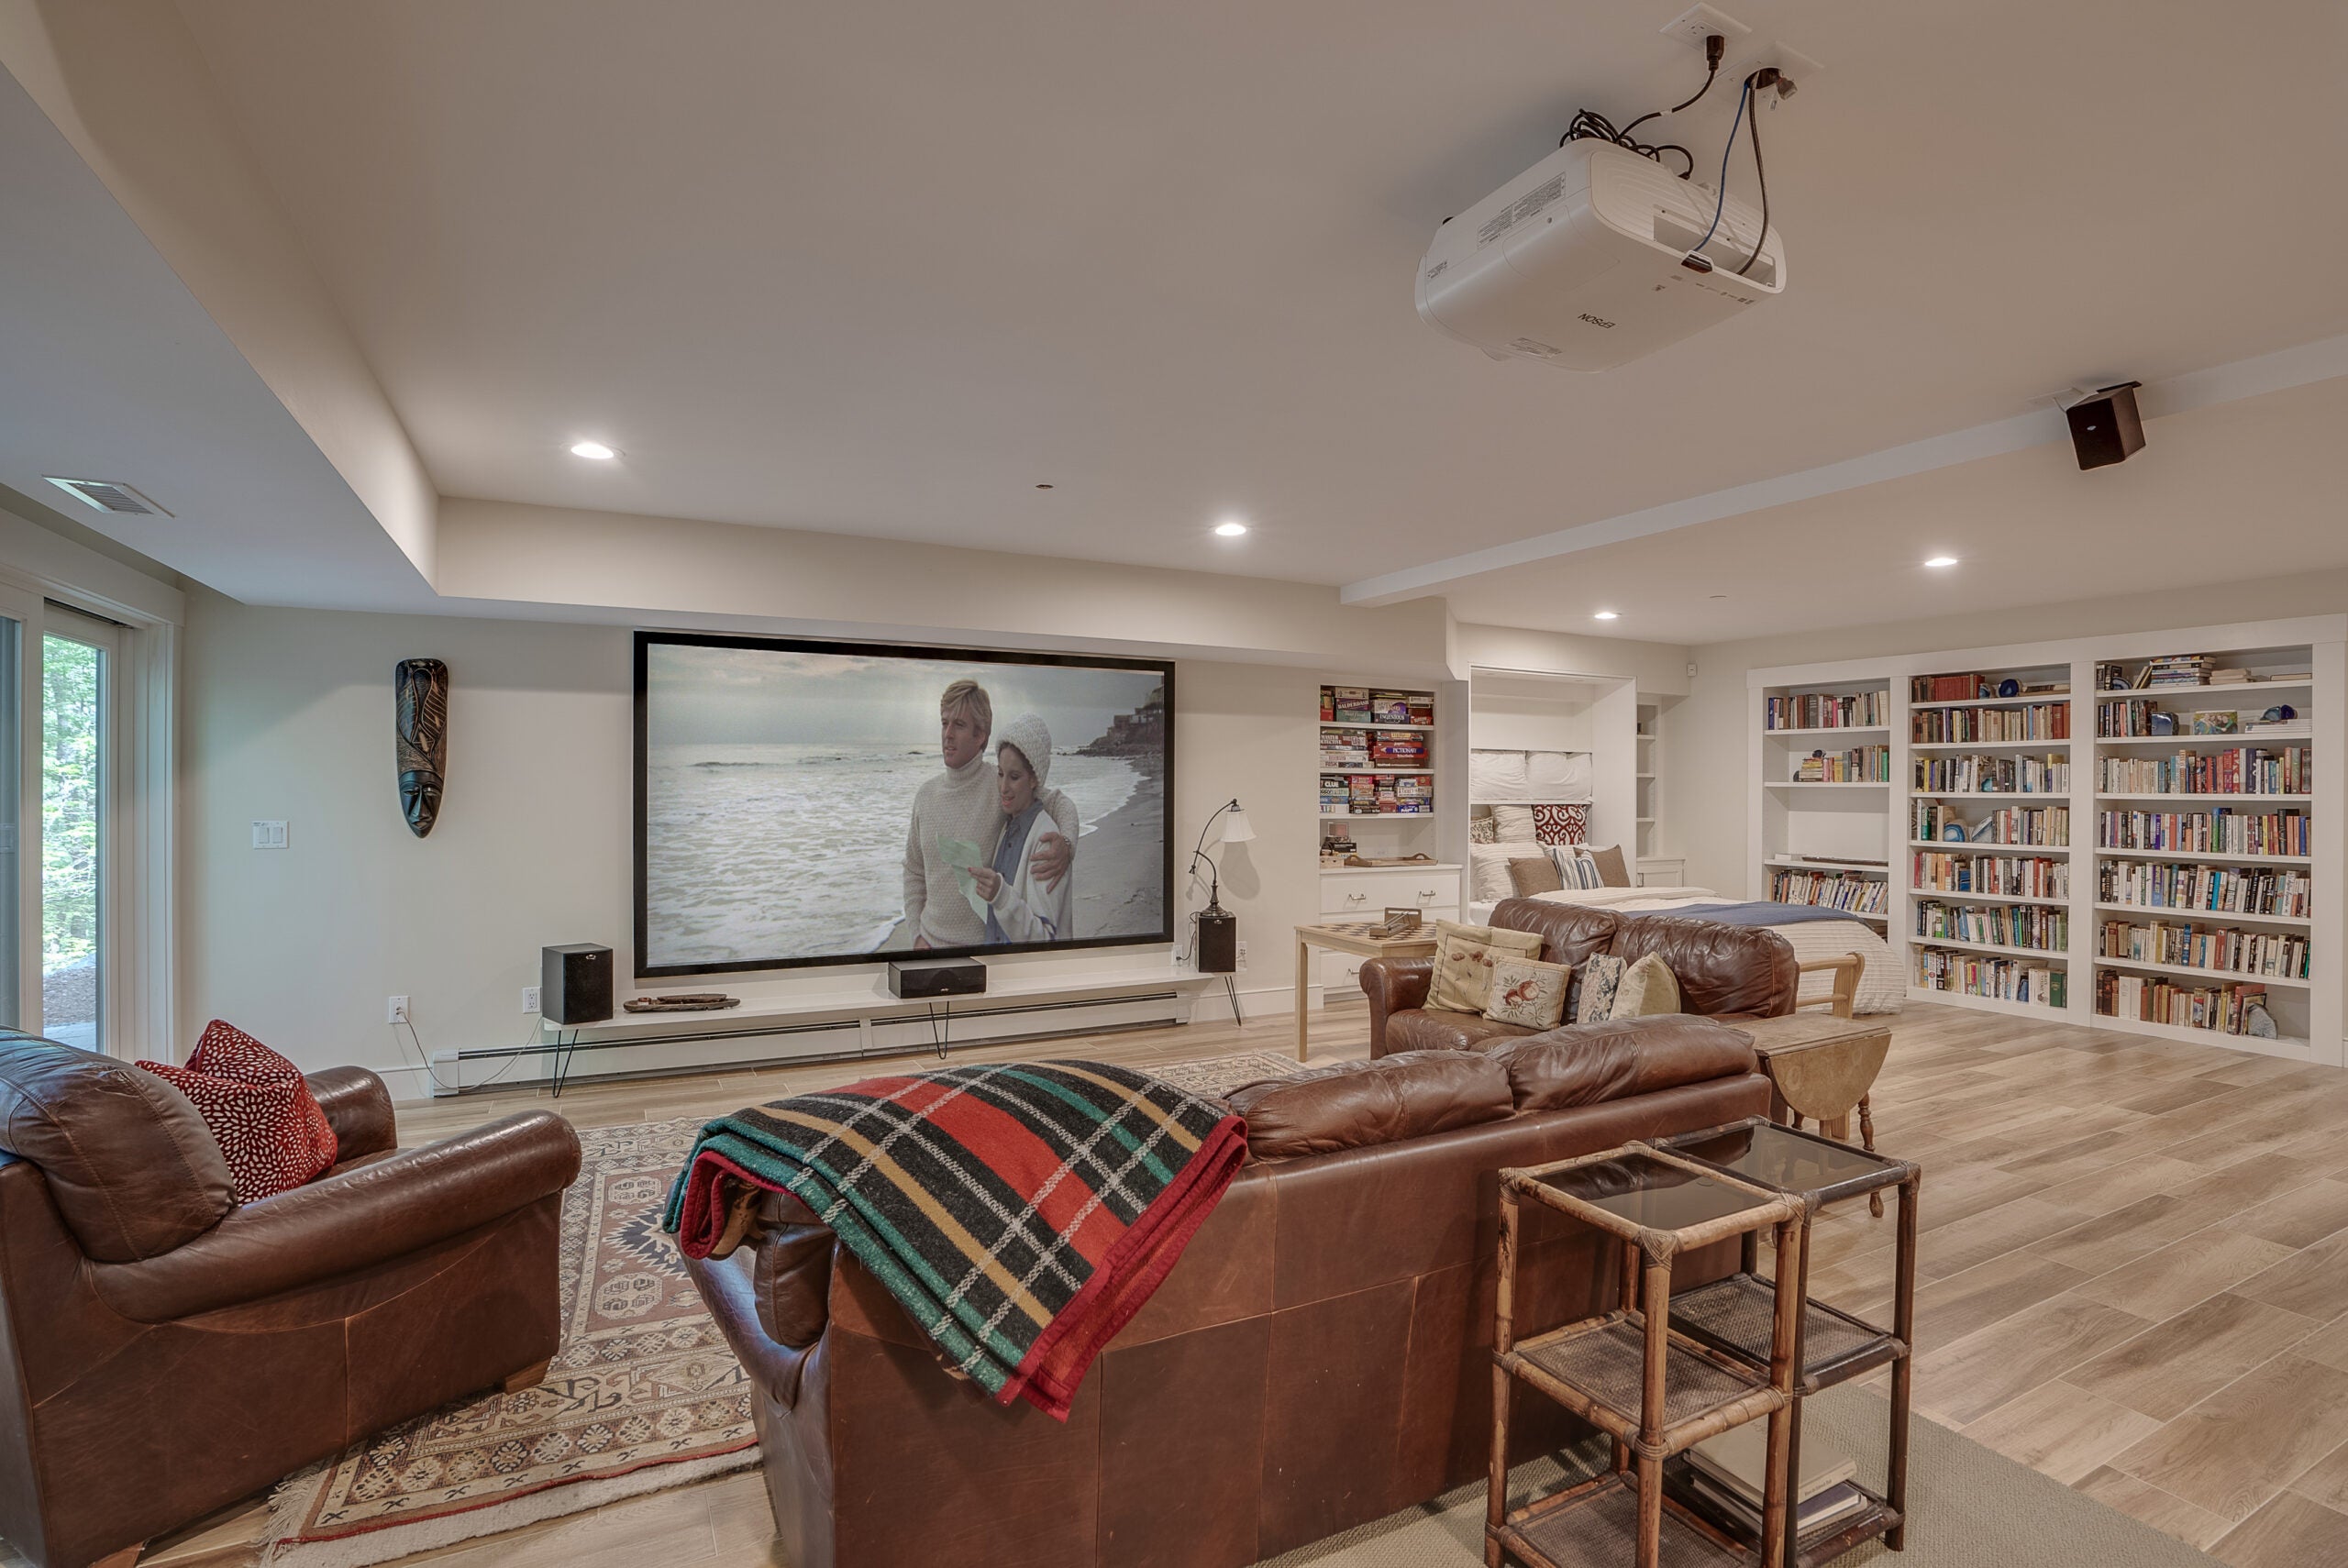 A room with a projector, leather couches and chairs, a big screen, recessed lighting, and white walls lined with bookshelves in a Bedford home.